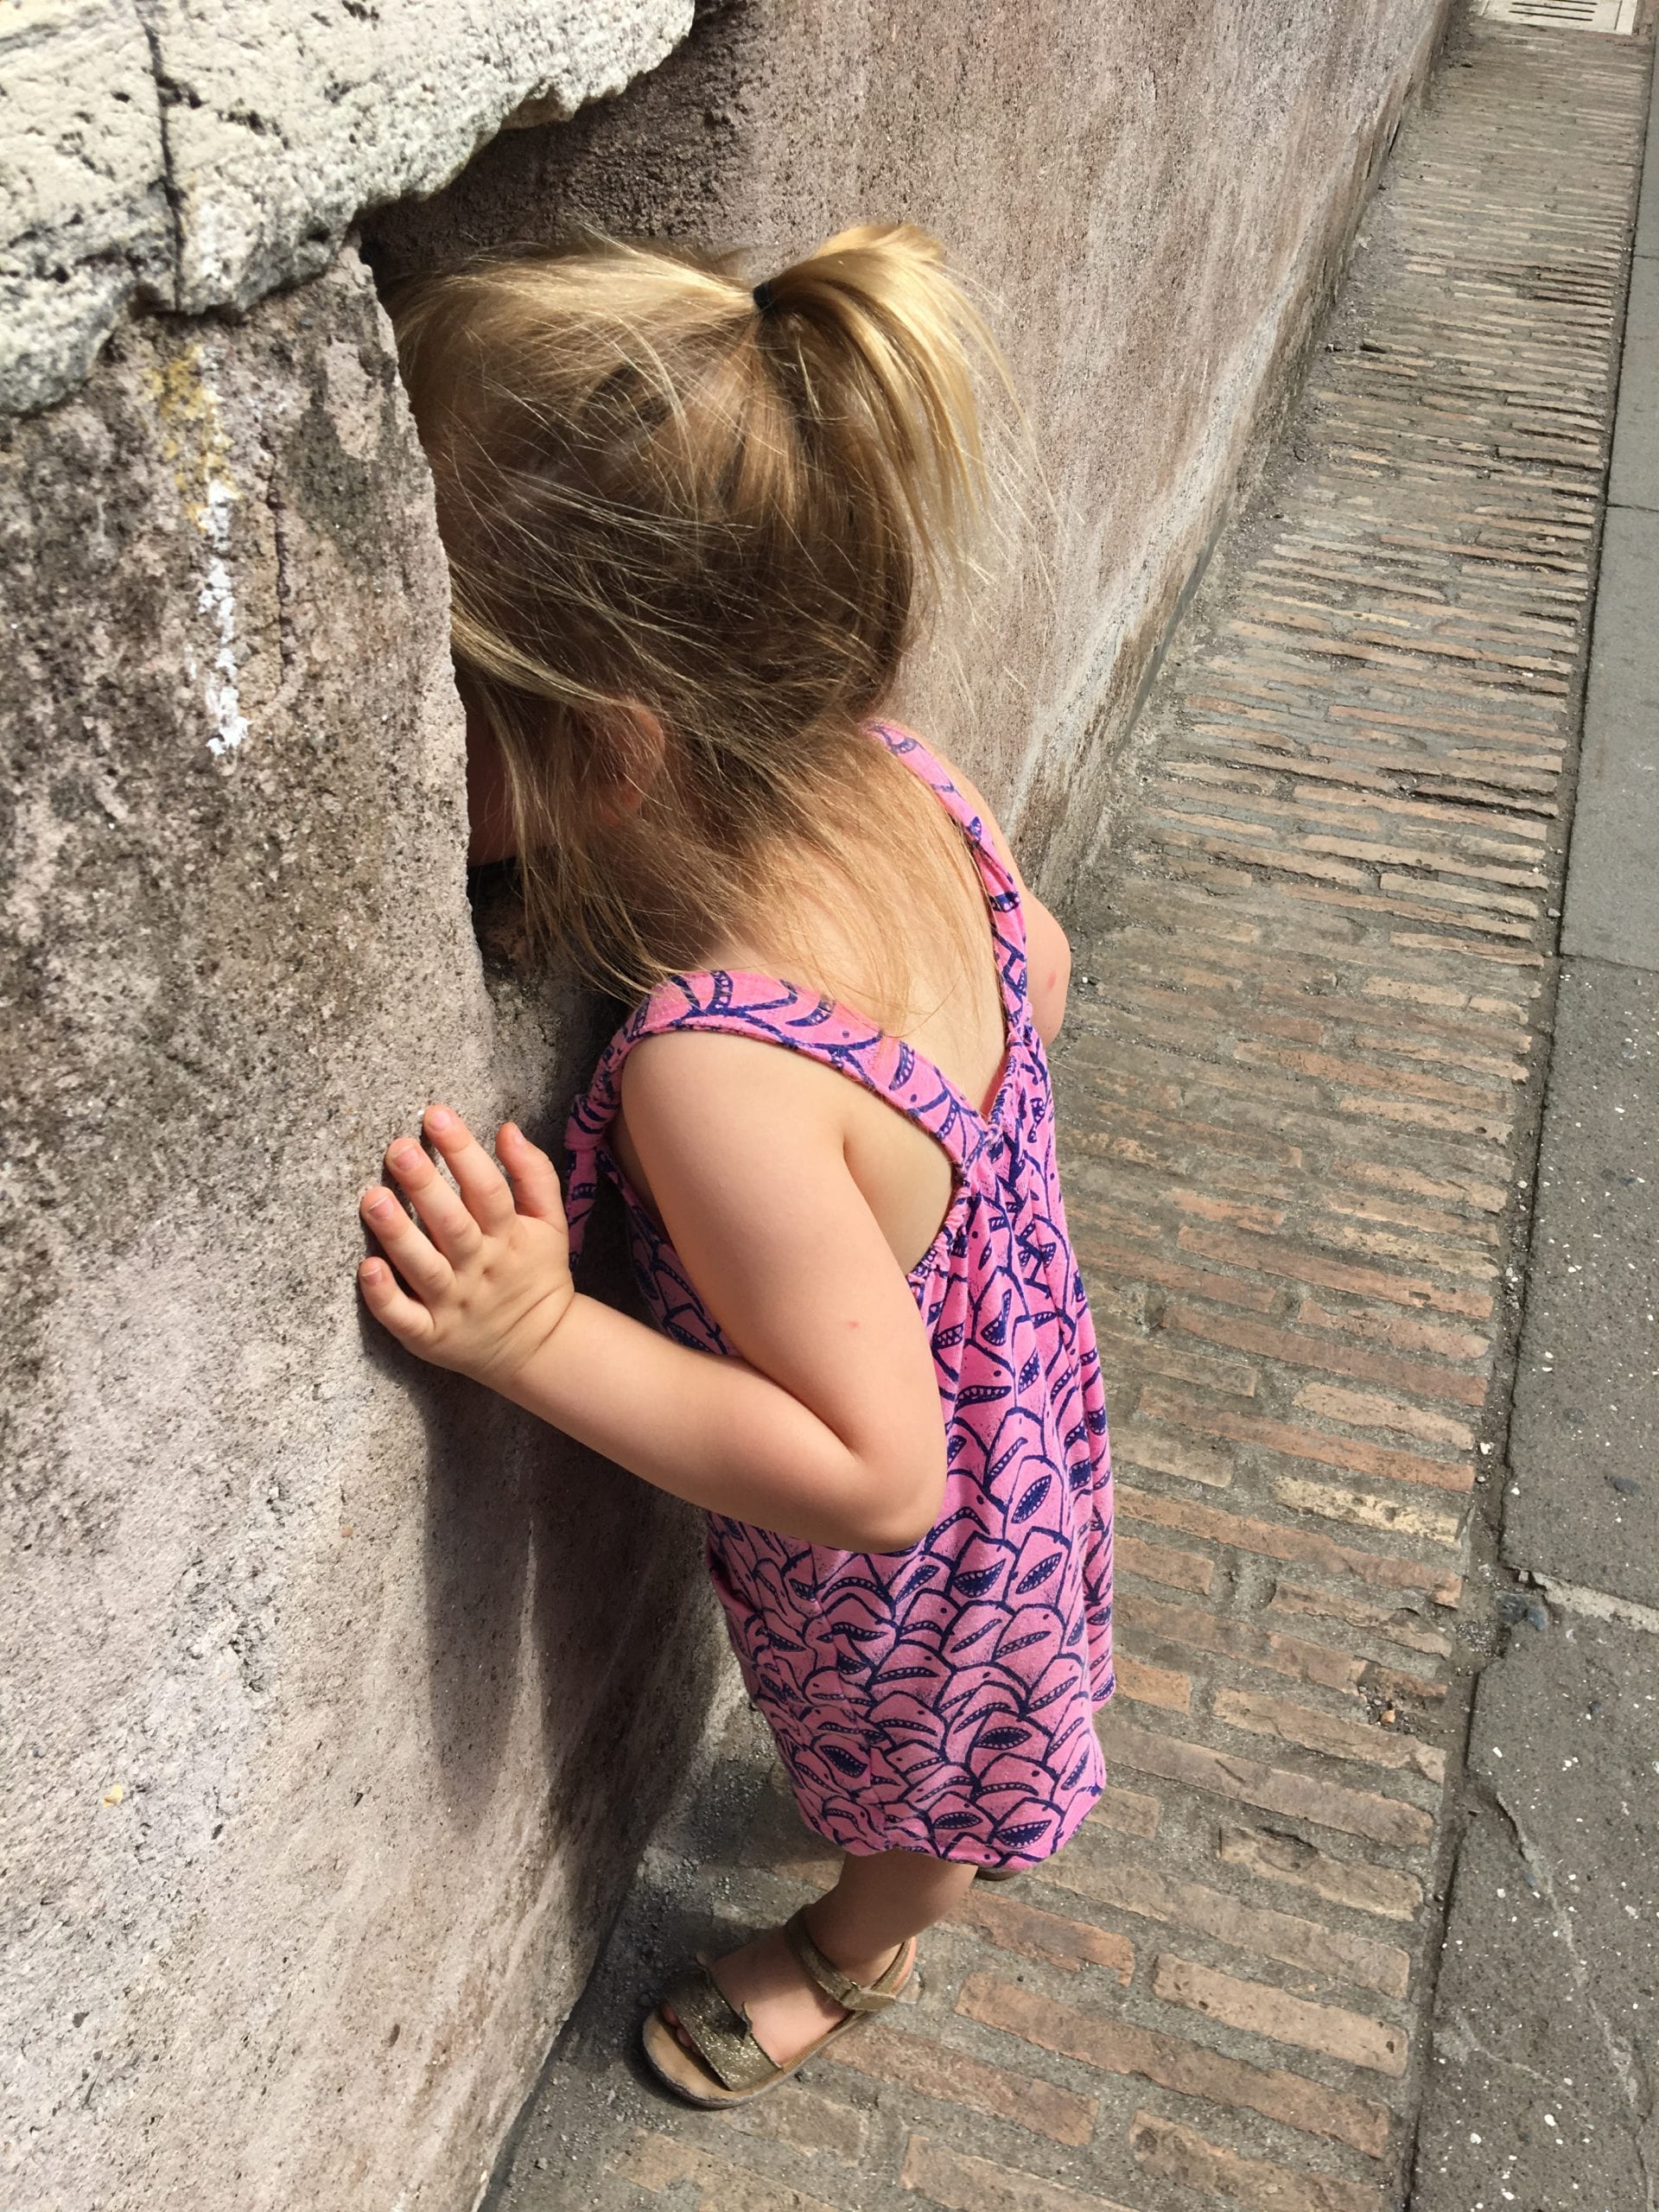 A young girl peaks out a archer's station at Castel Sant'Angelo, one of the best things to do Rome with toddlers.